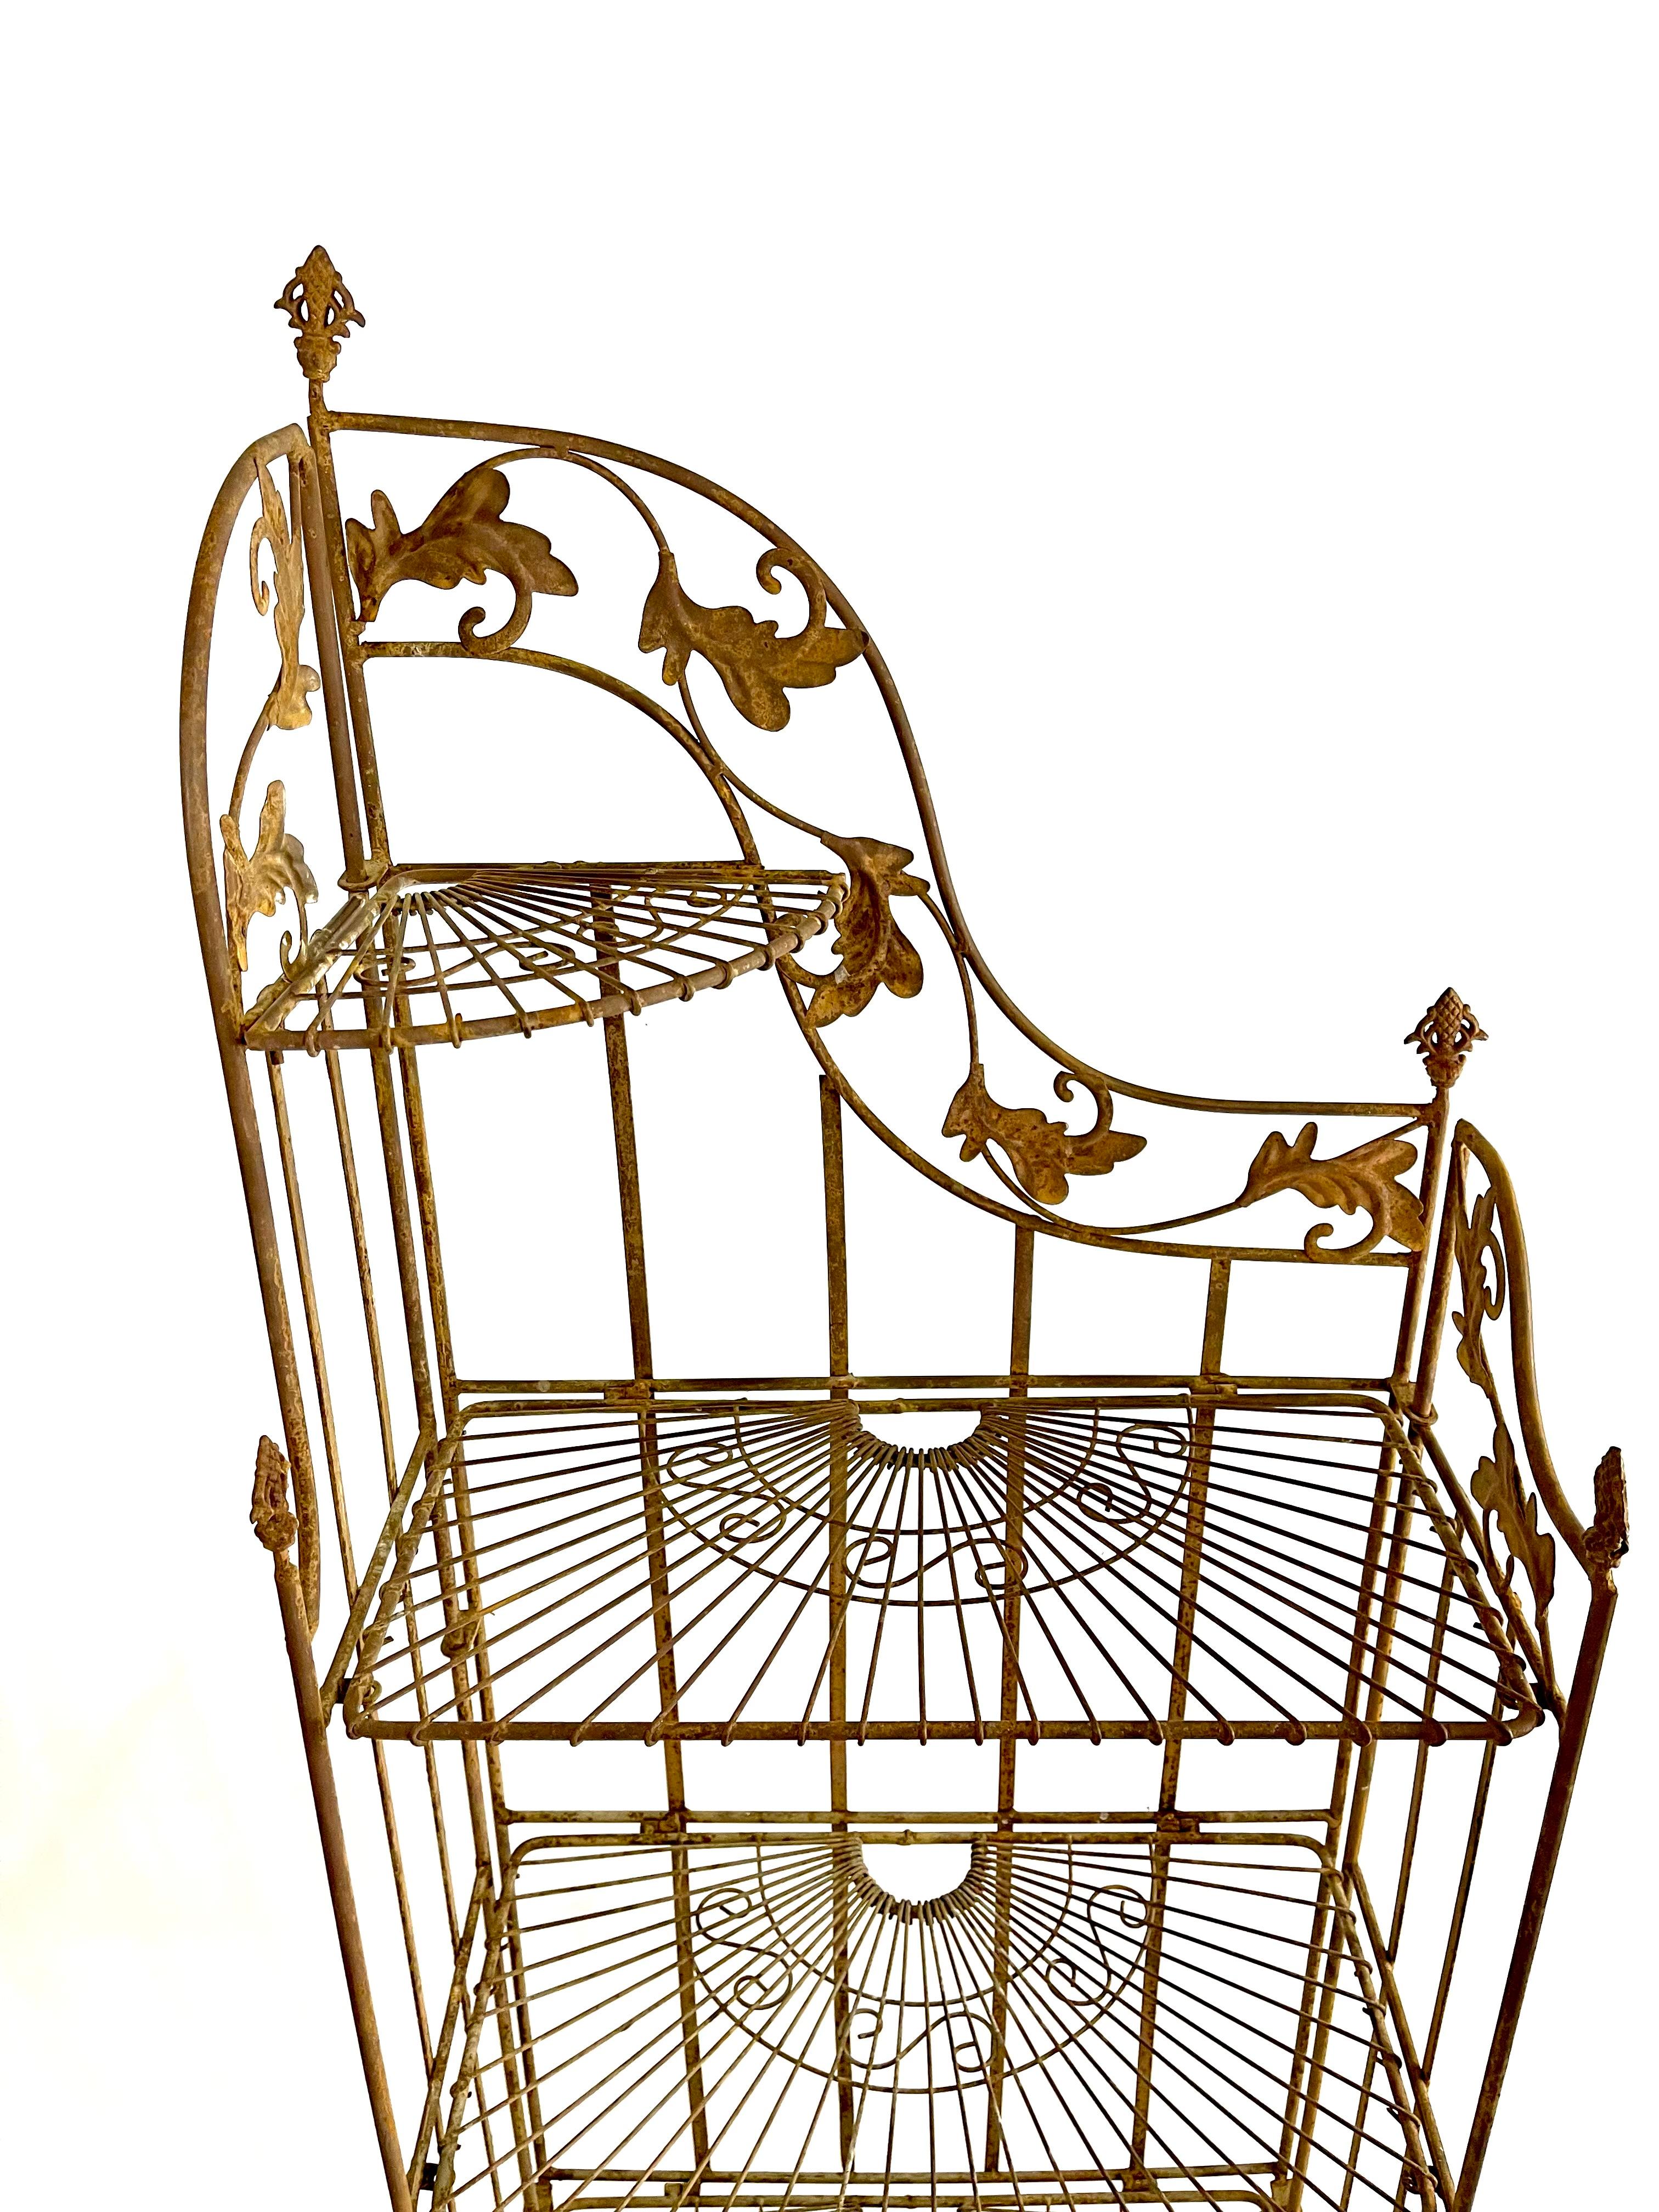 This vintage wrought iron plant shelf is the answer to your plant storage problems, both practical and sophisticated. Not only is it absolutely stunning with all the handmade iron details. It is also fully foldable to allow you to have space on your